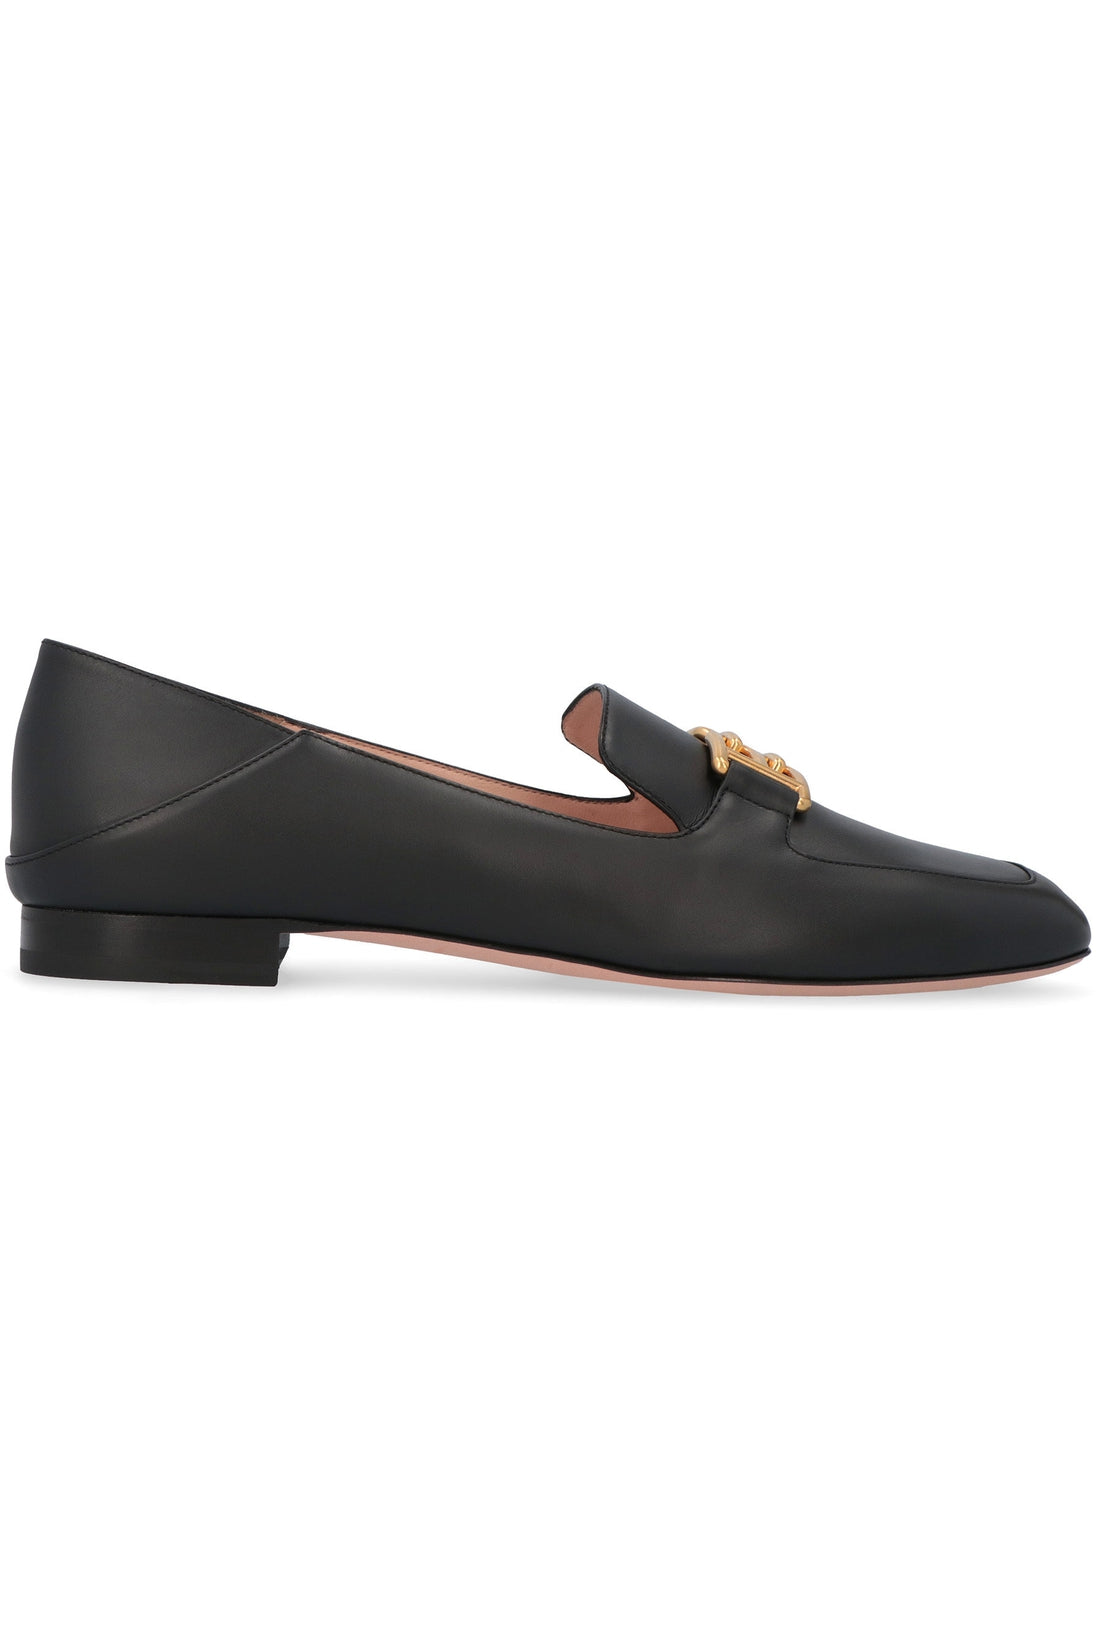 Bally-OUTLET-SALE-Ellah leather loafers-ARCHIVIST